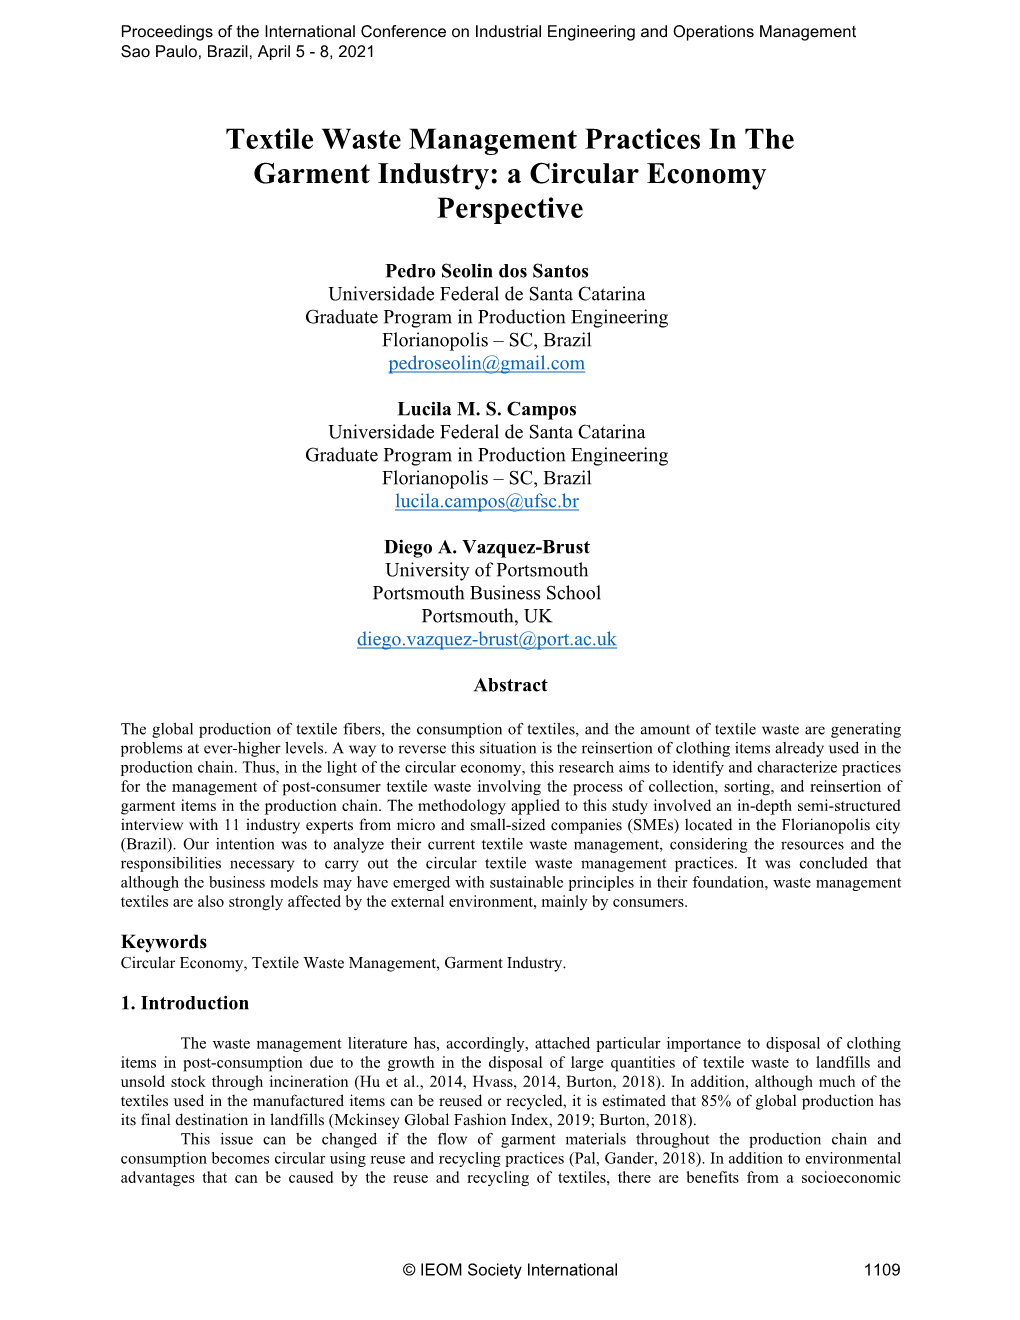 Textile Waste Management Practices in the Garment Industry: a Circular Economy Perspective